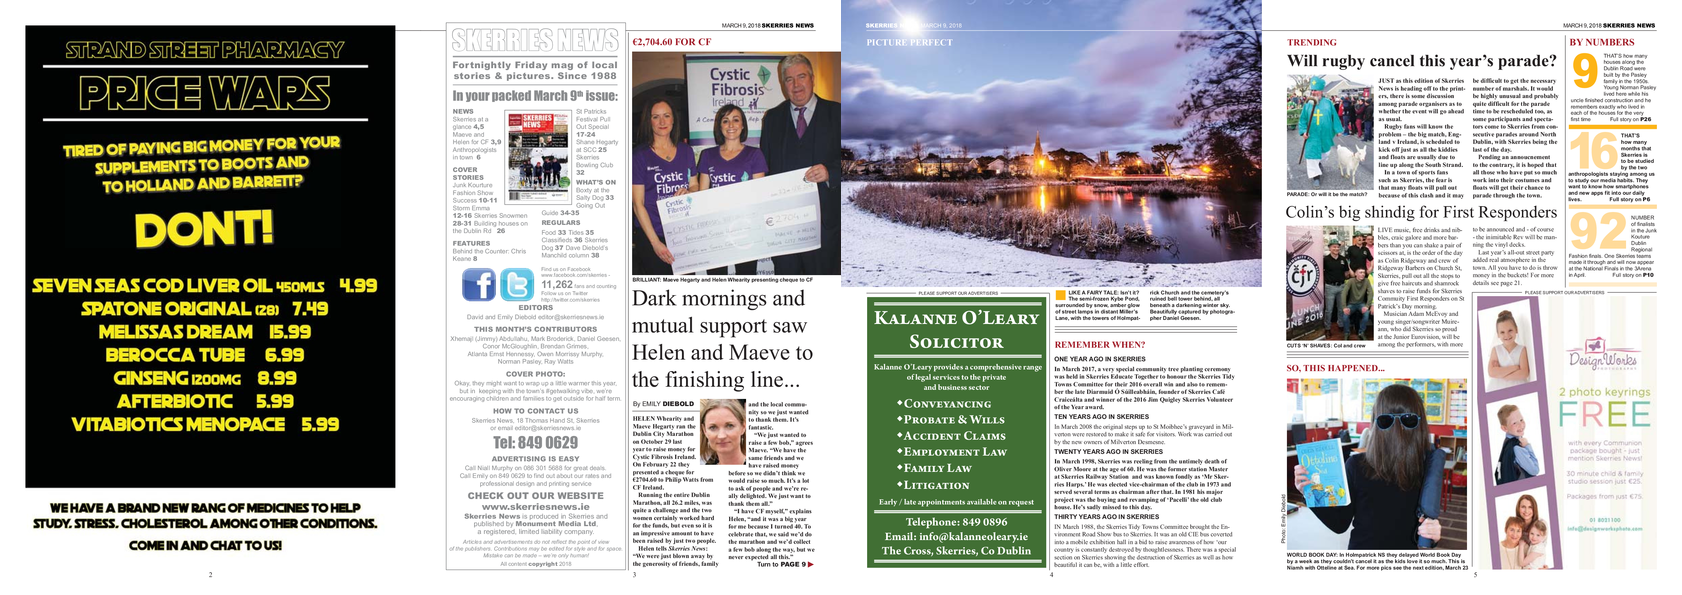 Skerries News March 9th 2018